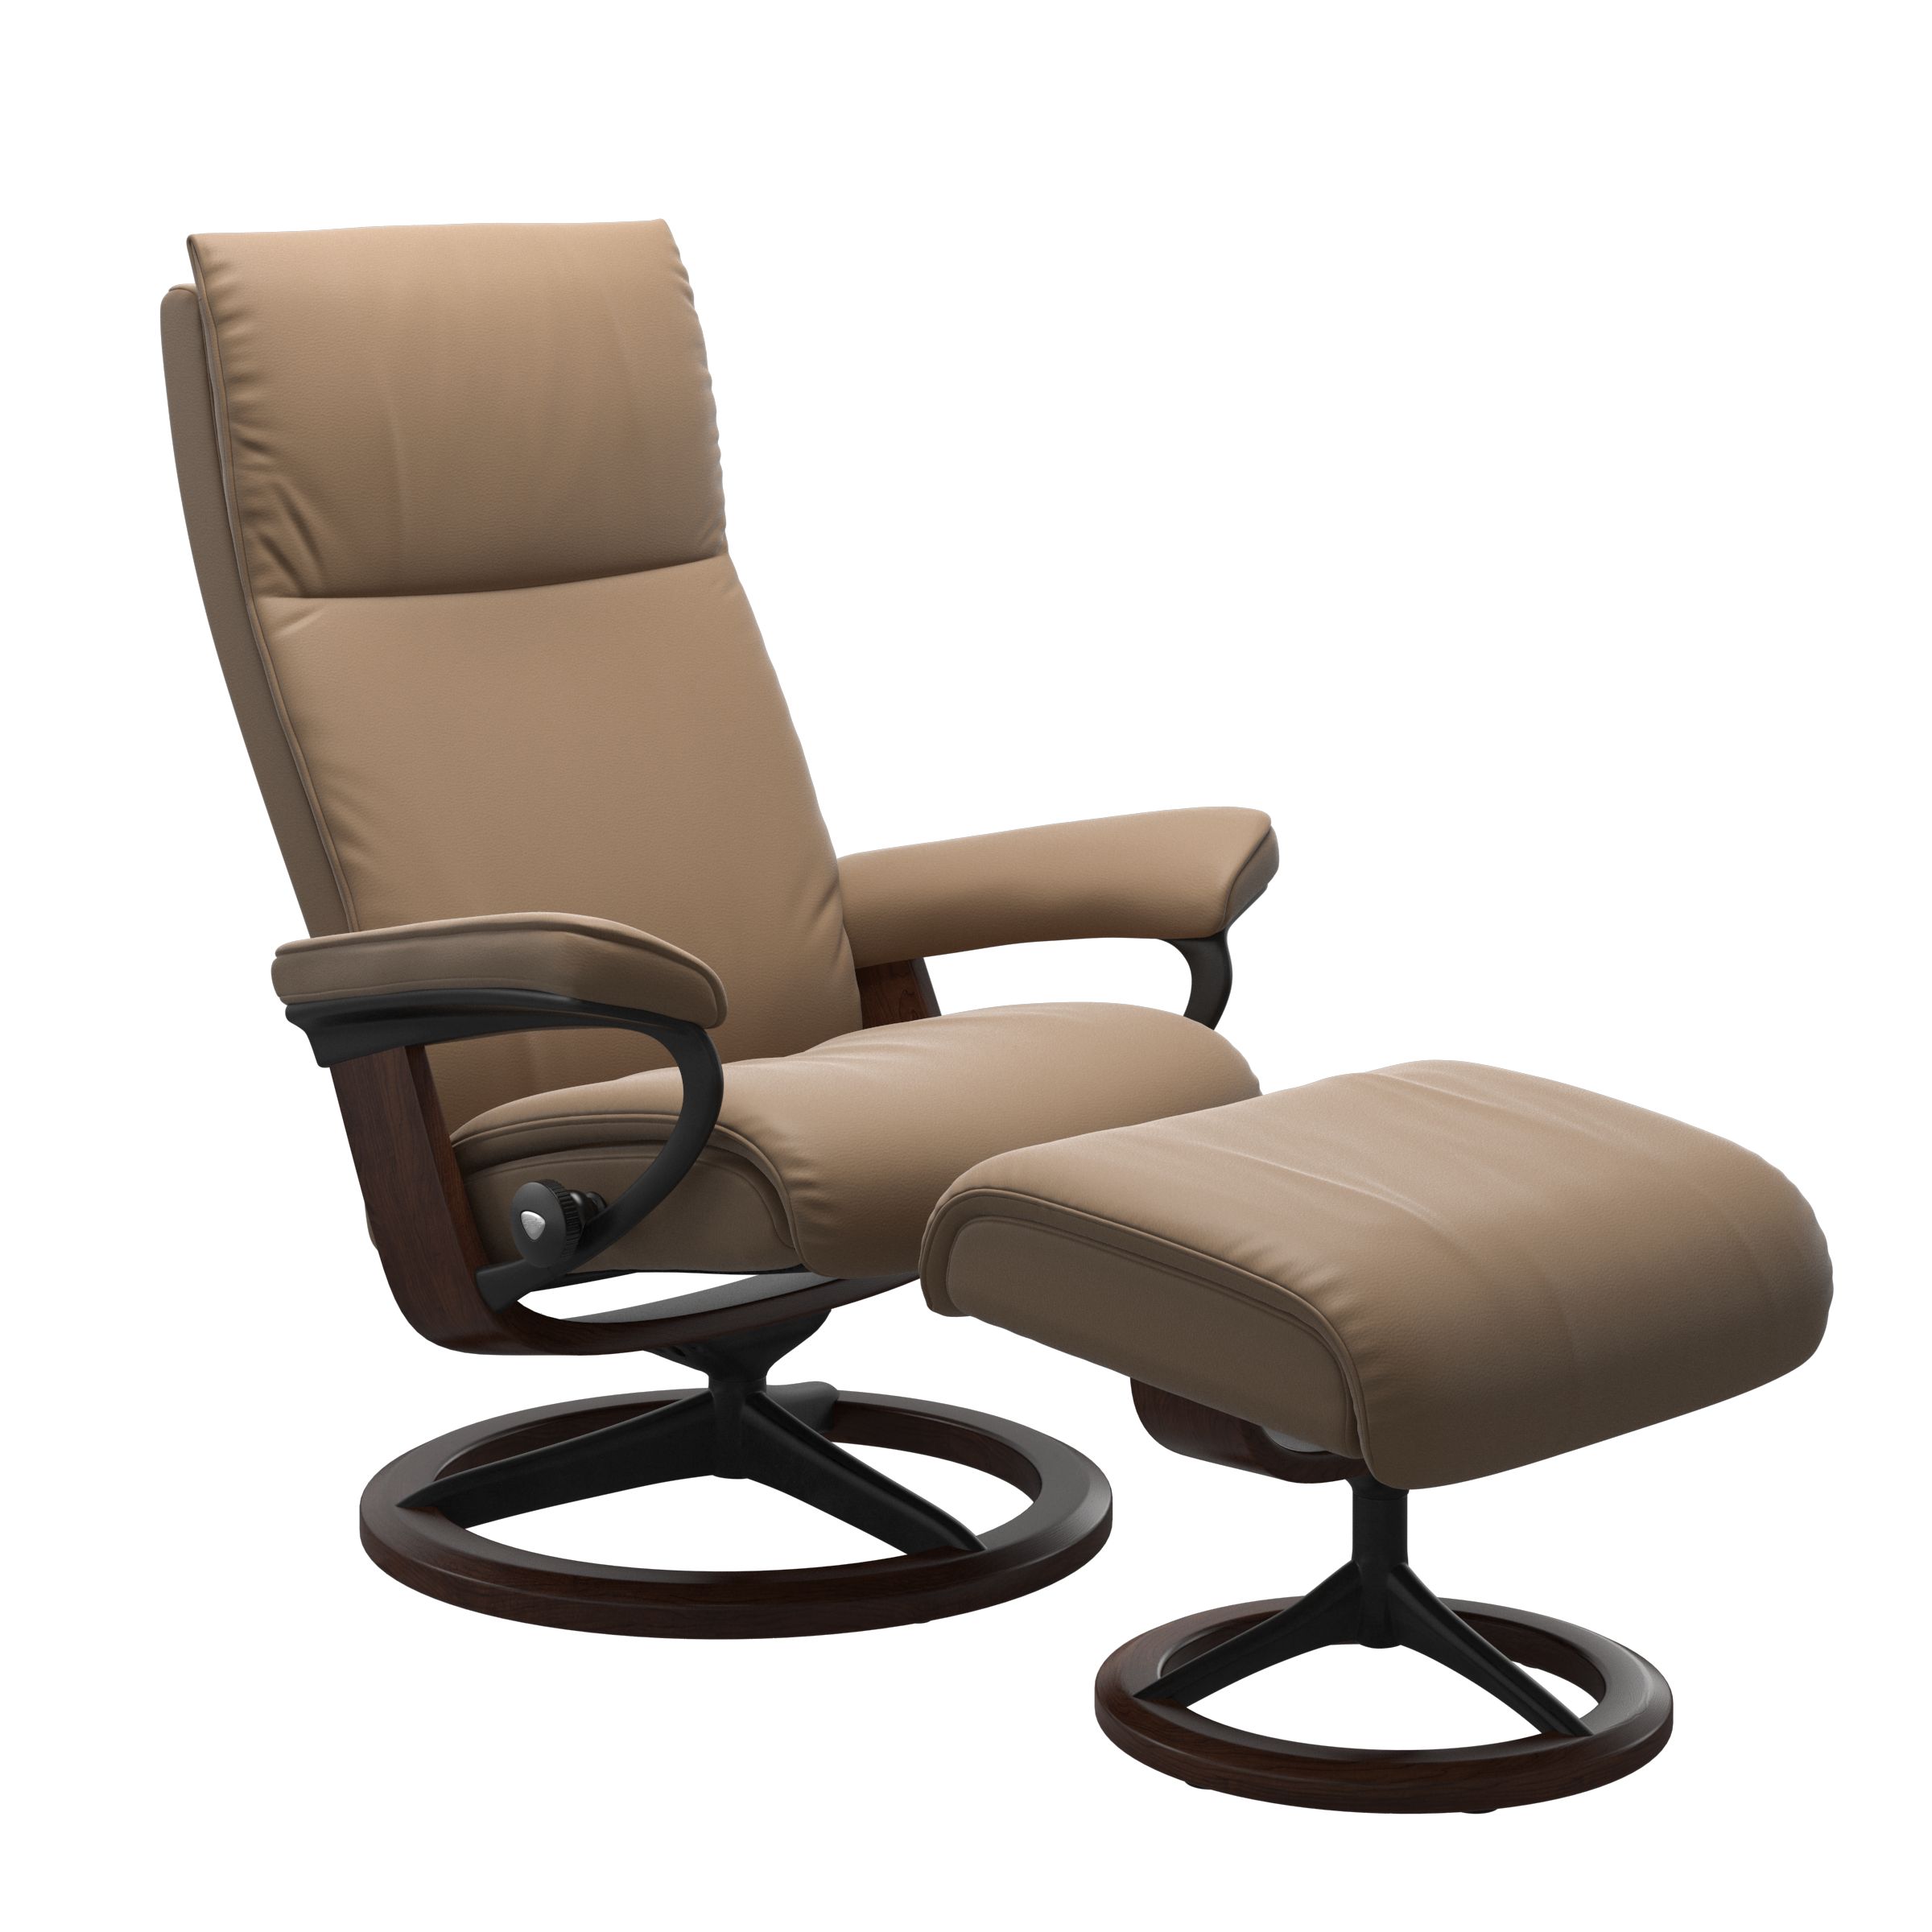 Stressless Aura Medium Recliner and Ottoman with Signature Base